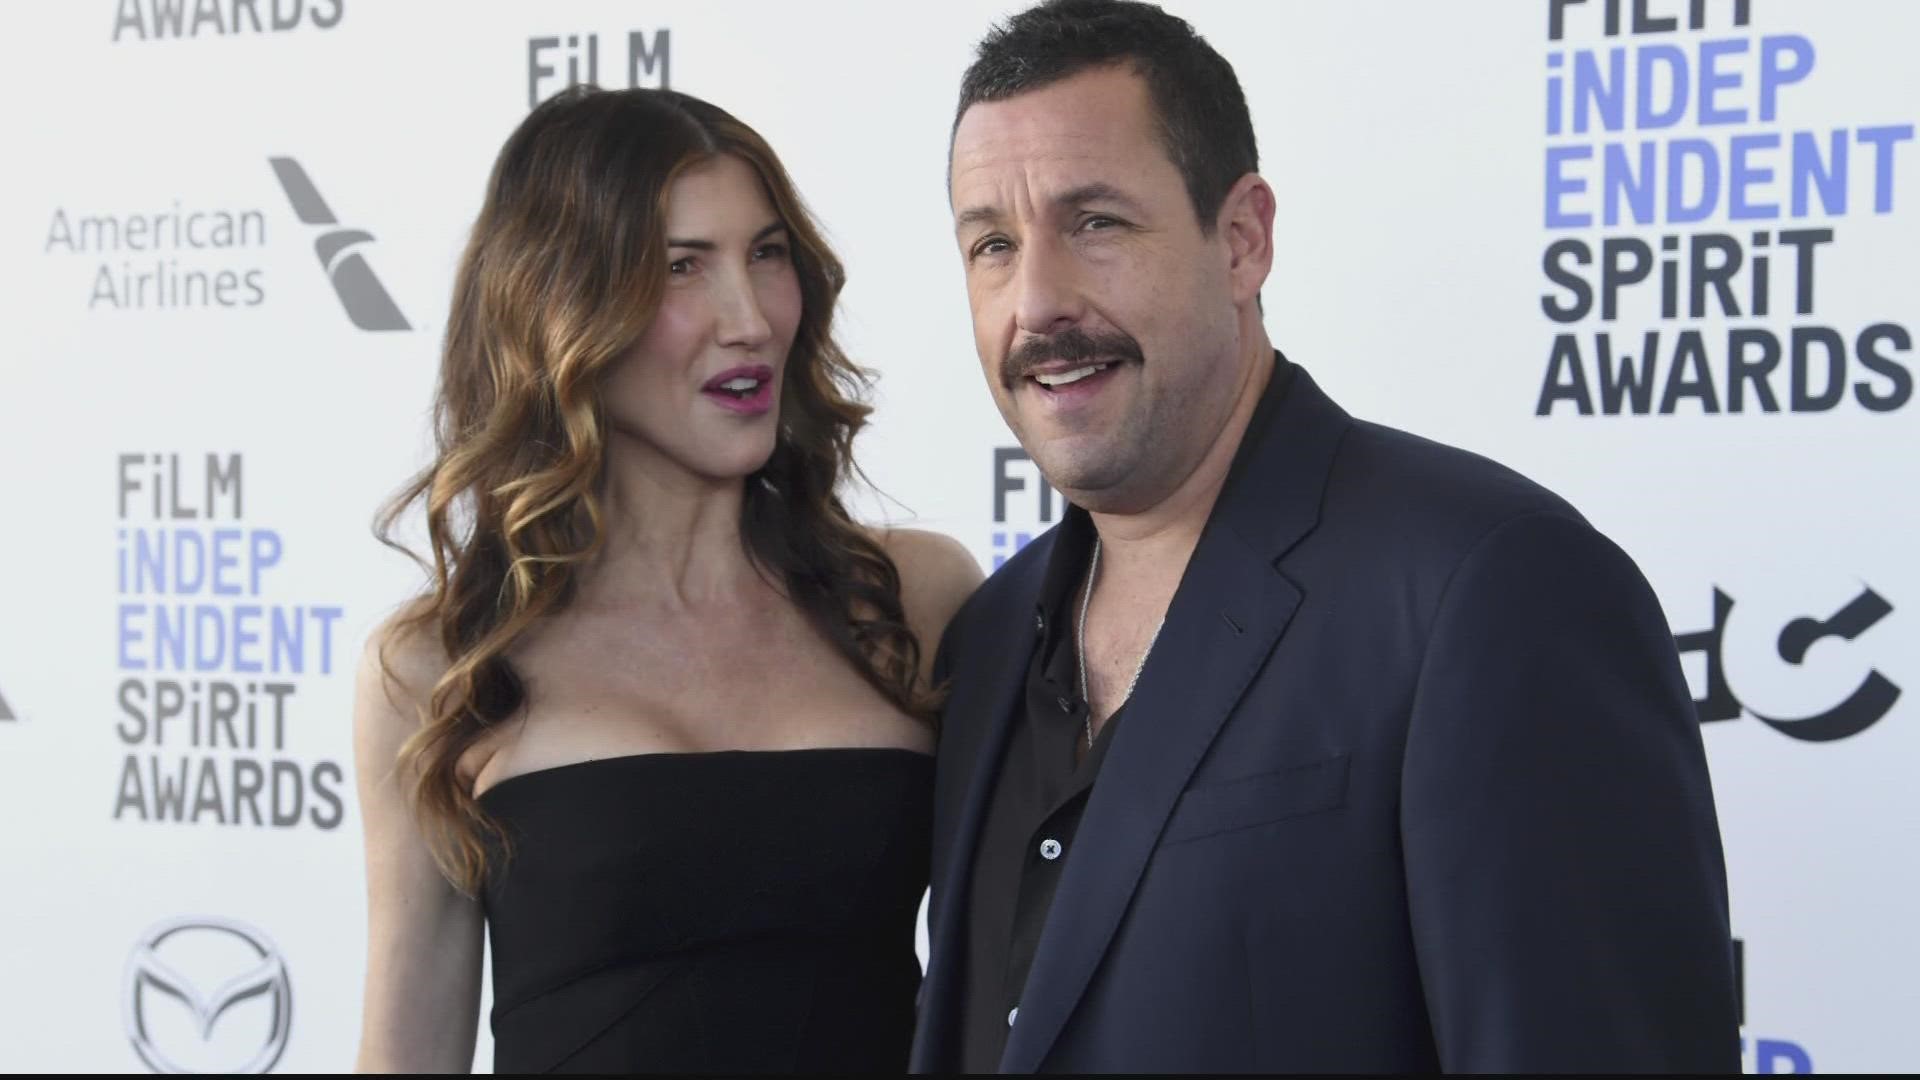 The John F. Kennedy Center for the Performing Arts said Tuesday that Adam Sandler would receive the prestigious award at a gala on March 19.